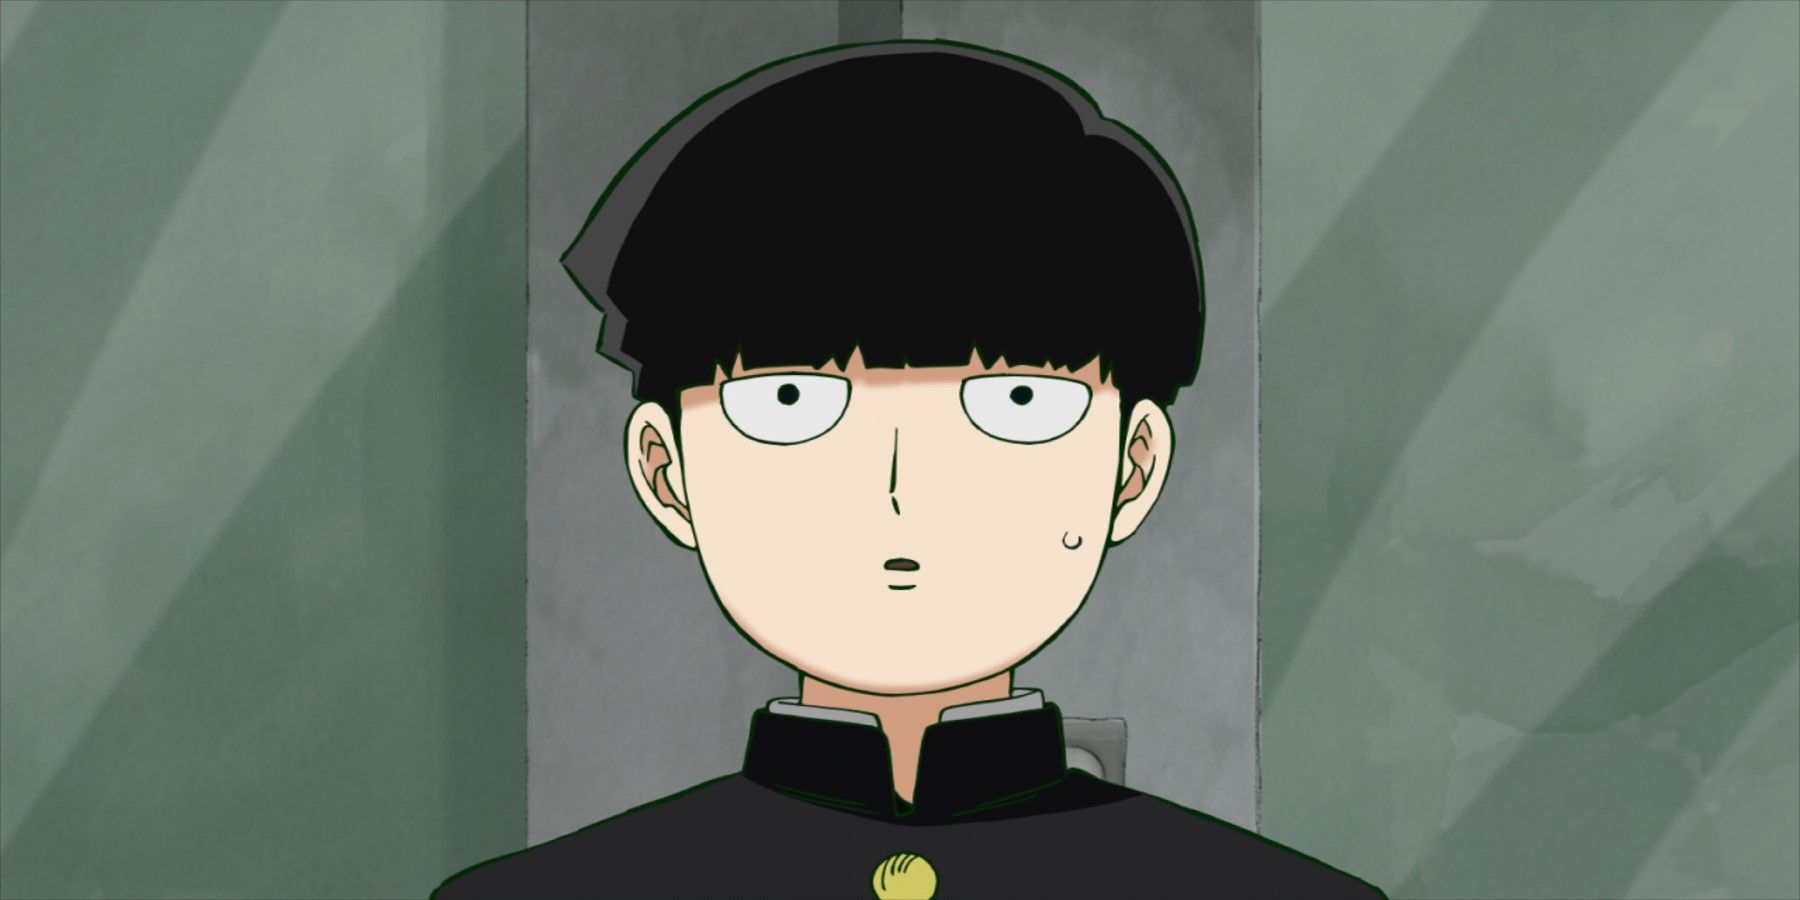 Mob has a clueless expression